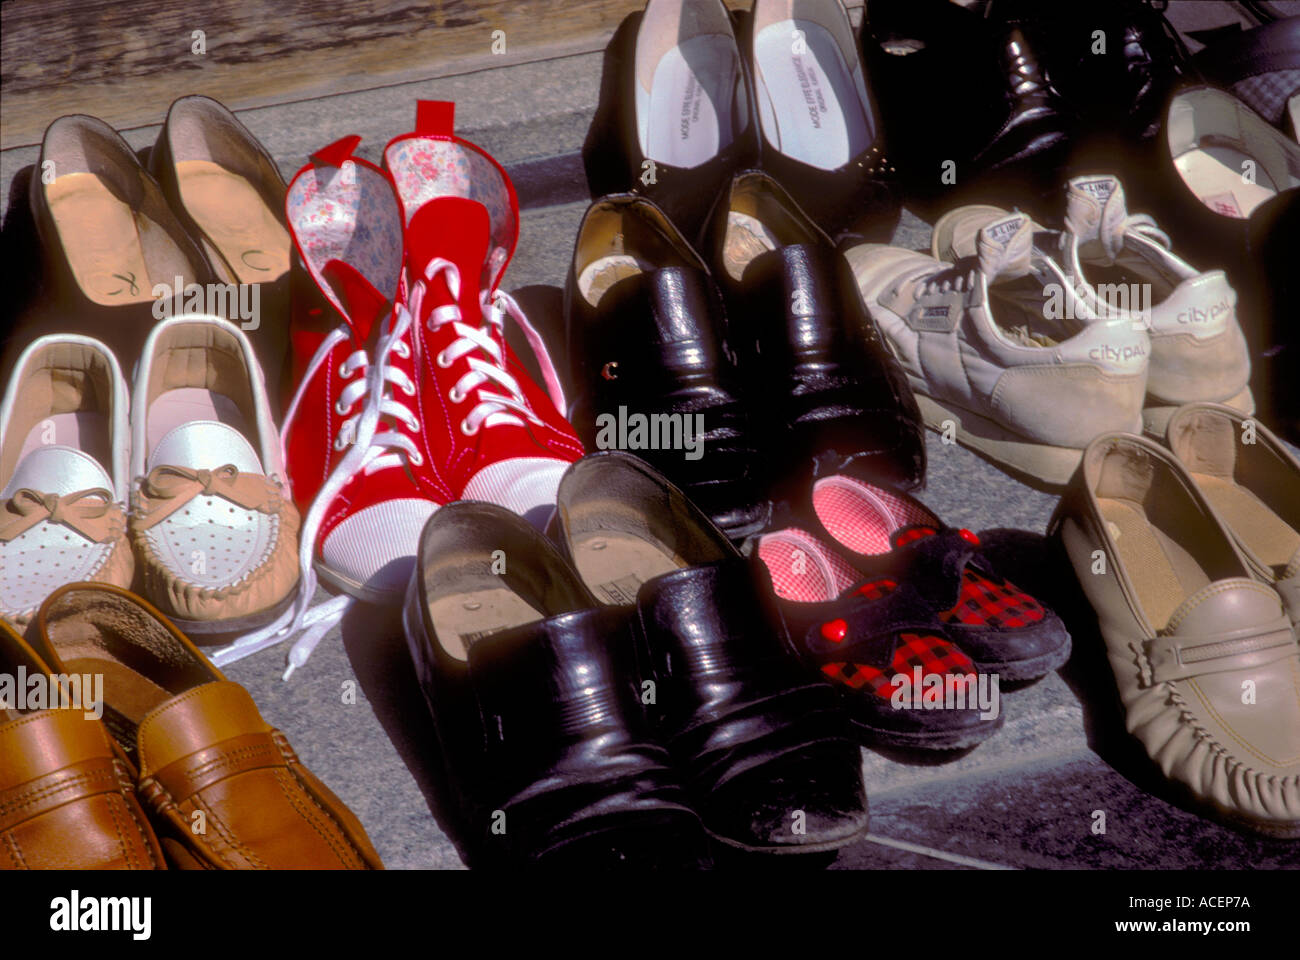 Collection of shoes at bottom of step removed before entering a temple in Japan Stock Photo